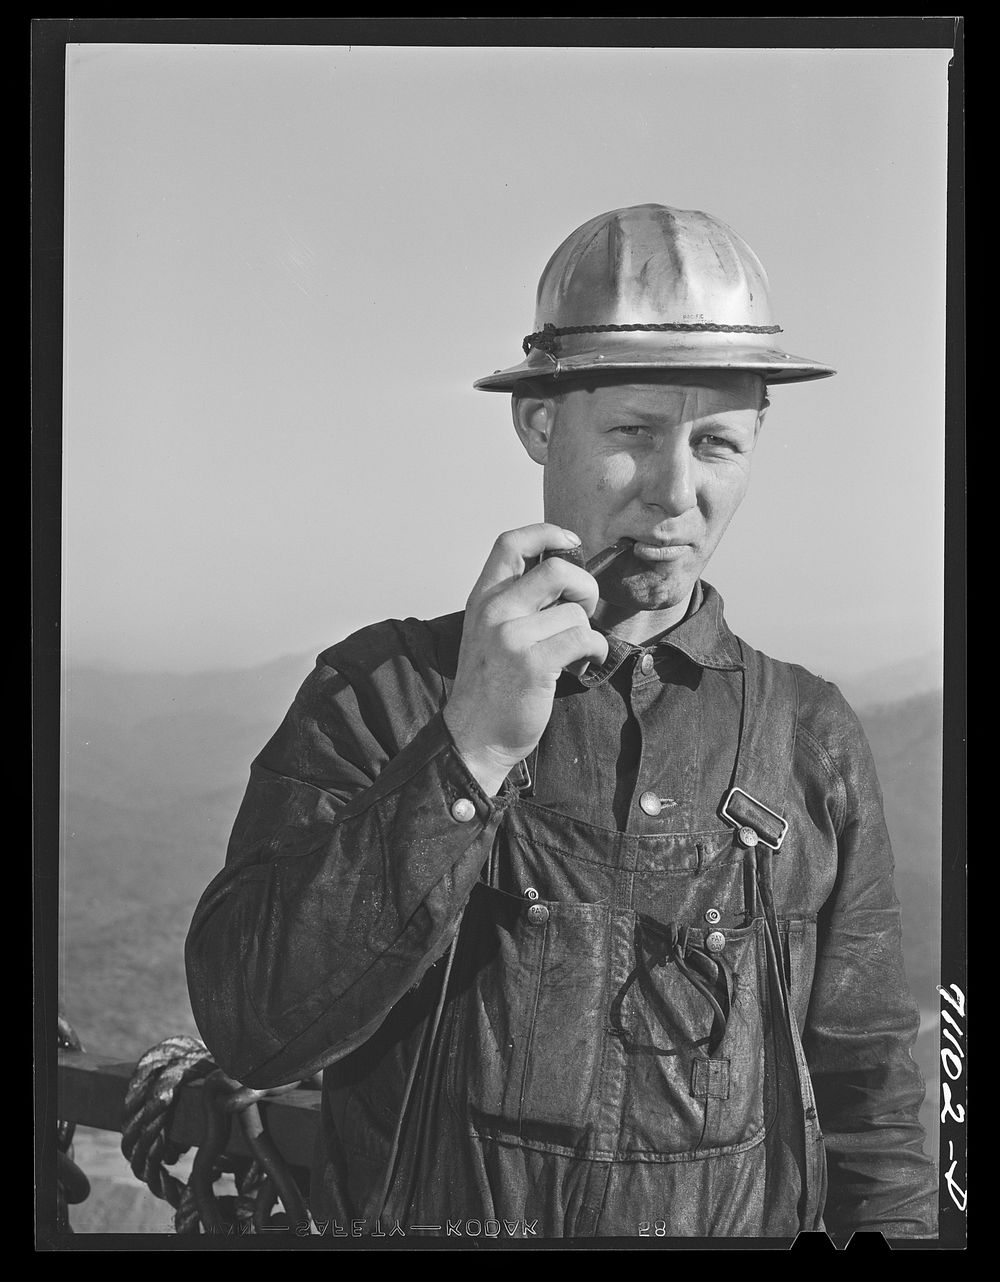 Workman at Shasta Dam. Shasta County, California by Russell Lee